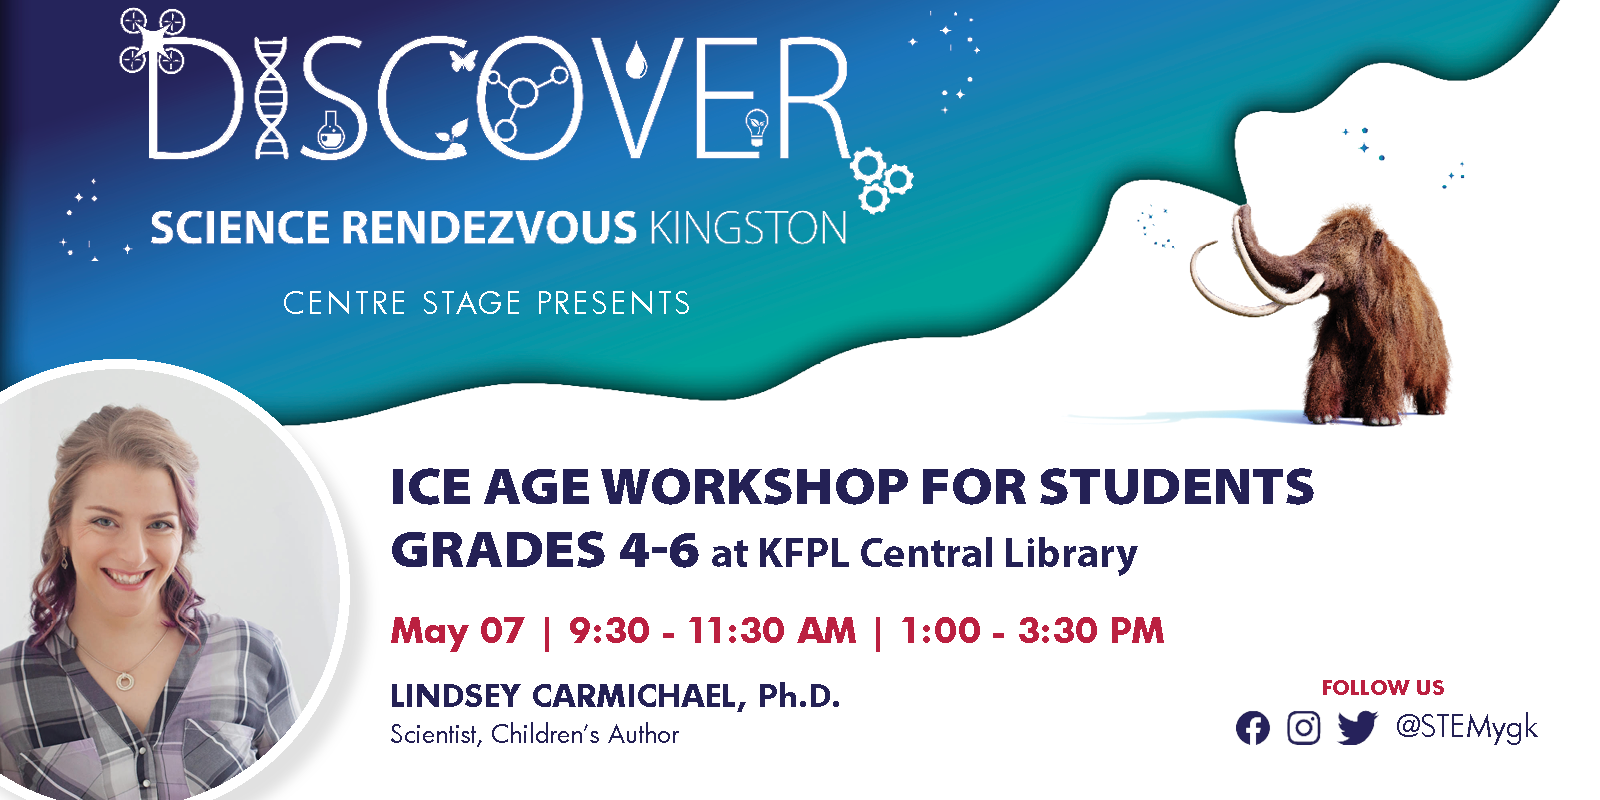 Science Rendezous Kingston presents Ice Age Workshop for Students grades 4-6 at KFPL Central Library May 07 9:30-11:30 Lindsey Carmichael PhD, Scientist, Children's Author